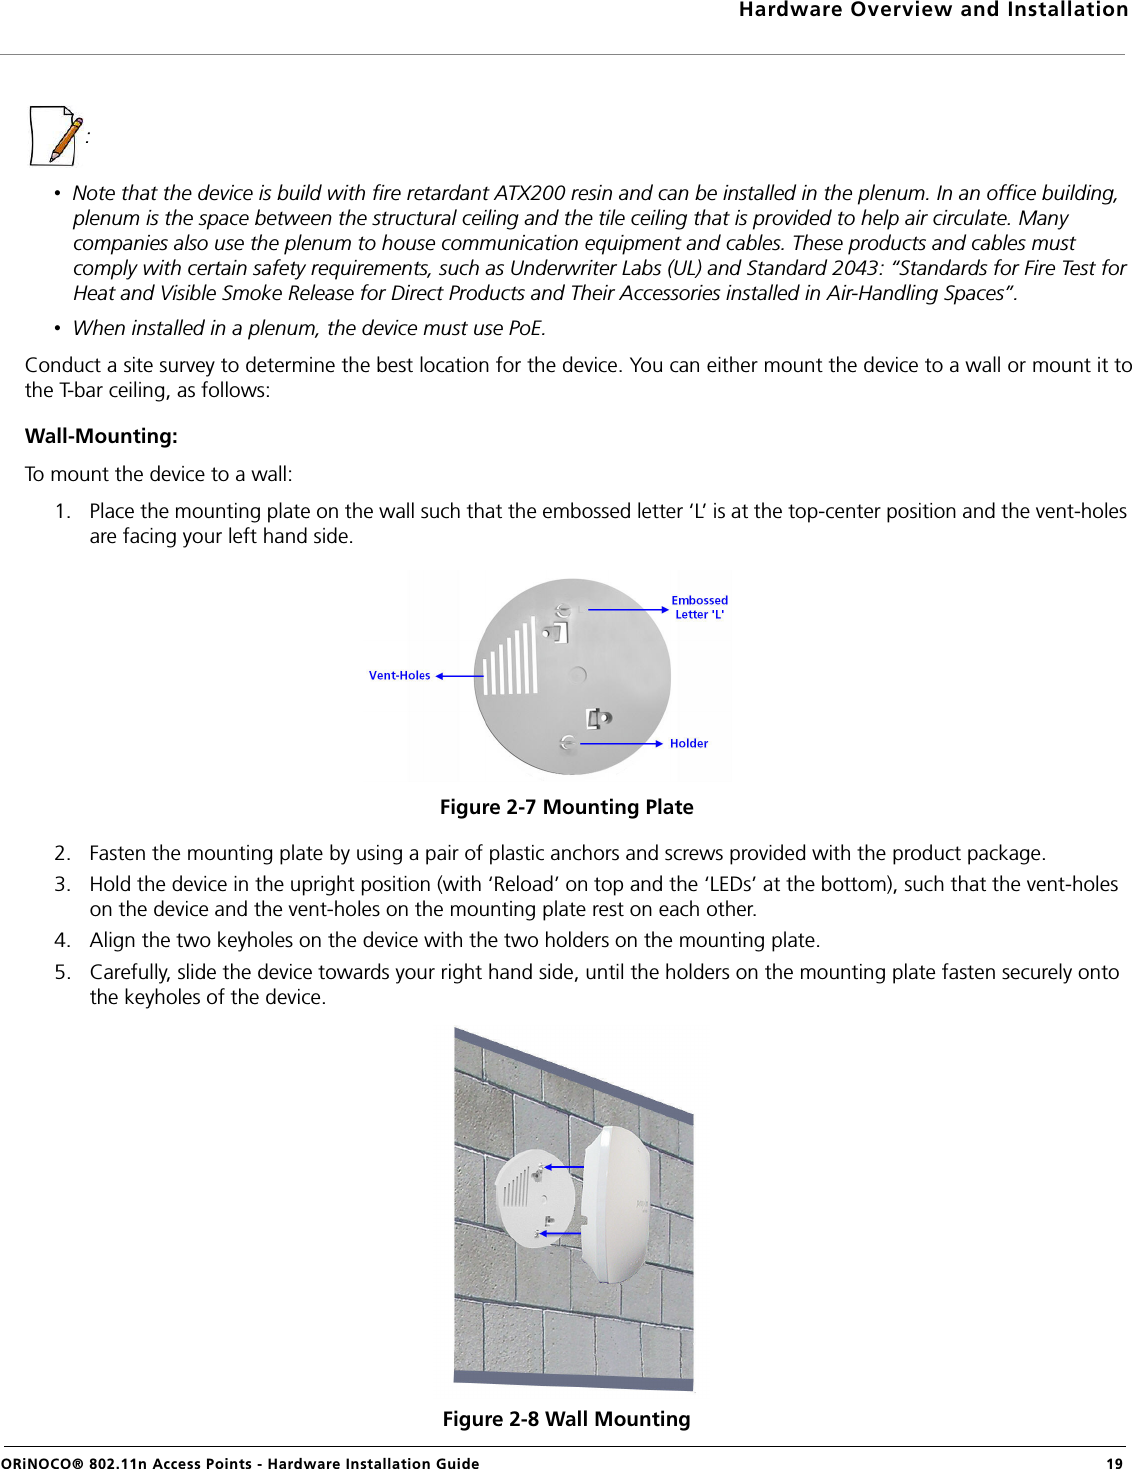 Hardware Overview and InstallationORiNOCO® 802.11n Access Points - Hardware Installation Guide  19: •  Note that the device is build with fire retardant ATX200 resin and can be installed in the plenum. In an office building, plenum is the space between the structural ceiling and the tile ceiling that is provided to help air circulate. Many companies also use the plenum to house communication equipment and cables. These products and cables must comply with certain safety requirements, such as Underwriter Labs (UL) and Standard 2043: “Standards for Fire Test for Heat and Visible Smoke Release for Direct Products and Their Accessories installed in Air-Handling Spaces”.•  When installed in a plenum, the device must use PoE.Conduct a site survey to determine the best location for the device. You can either mount the device to a wall or mount it tothe T-bar ceiling, as follows:Wall-Mounting:To mount the device to a wall:1. Place the mounting plate on the wall such that the embossed letter ‘L’ is at the top-center position and the vent-holes are facing your left hand side.Figure 2-7 Mounting Plate2. Fasten the mounting plate by using a pair of plastic anchors and screws provided with the product package.3. Hold the device in the upright position (with ‘Reload’ on top and the ‘LEDs’ at the bottom), such that the vent-holes on the device and the vent-holes on the mounting plate rest on each other.4. Align the two keyholes on the device with the two holders on the mounting plate.5. Carefully, slide the device towards your right hand side, until the holders on the mounting plate fasten securely onto the keyholes of the device.Figure 2-8 Wall Mounting